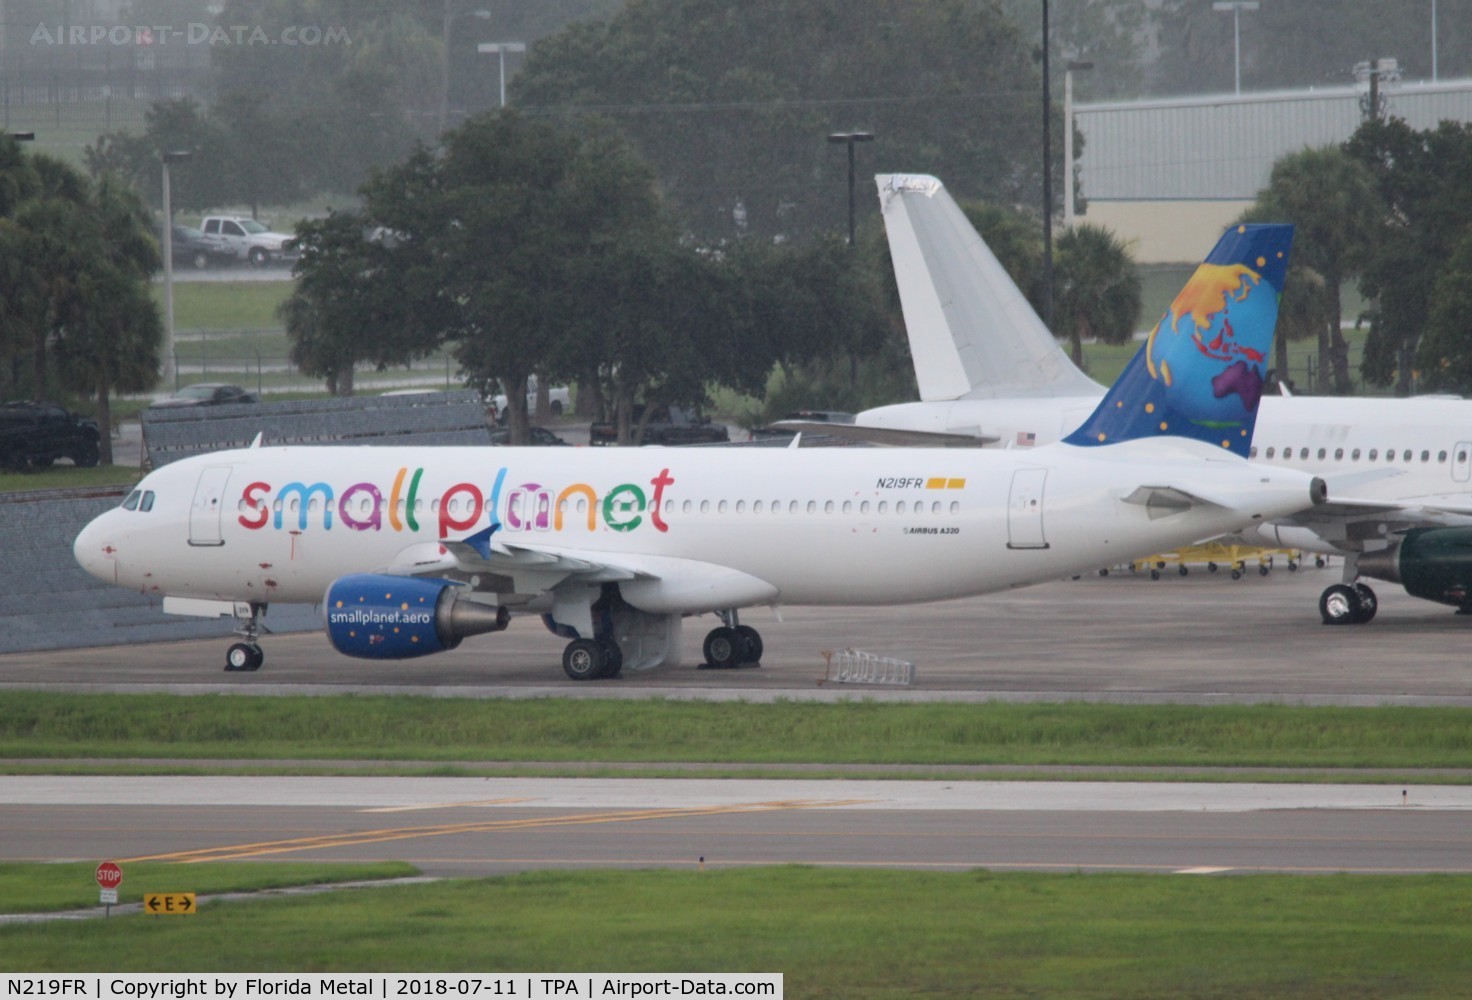 N219FR, 2002 Airbus A320-214 C/N 1860, Ex Frontier, Small Planet Airlines Germany